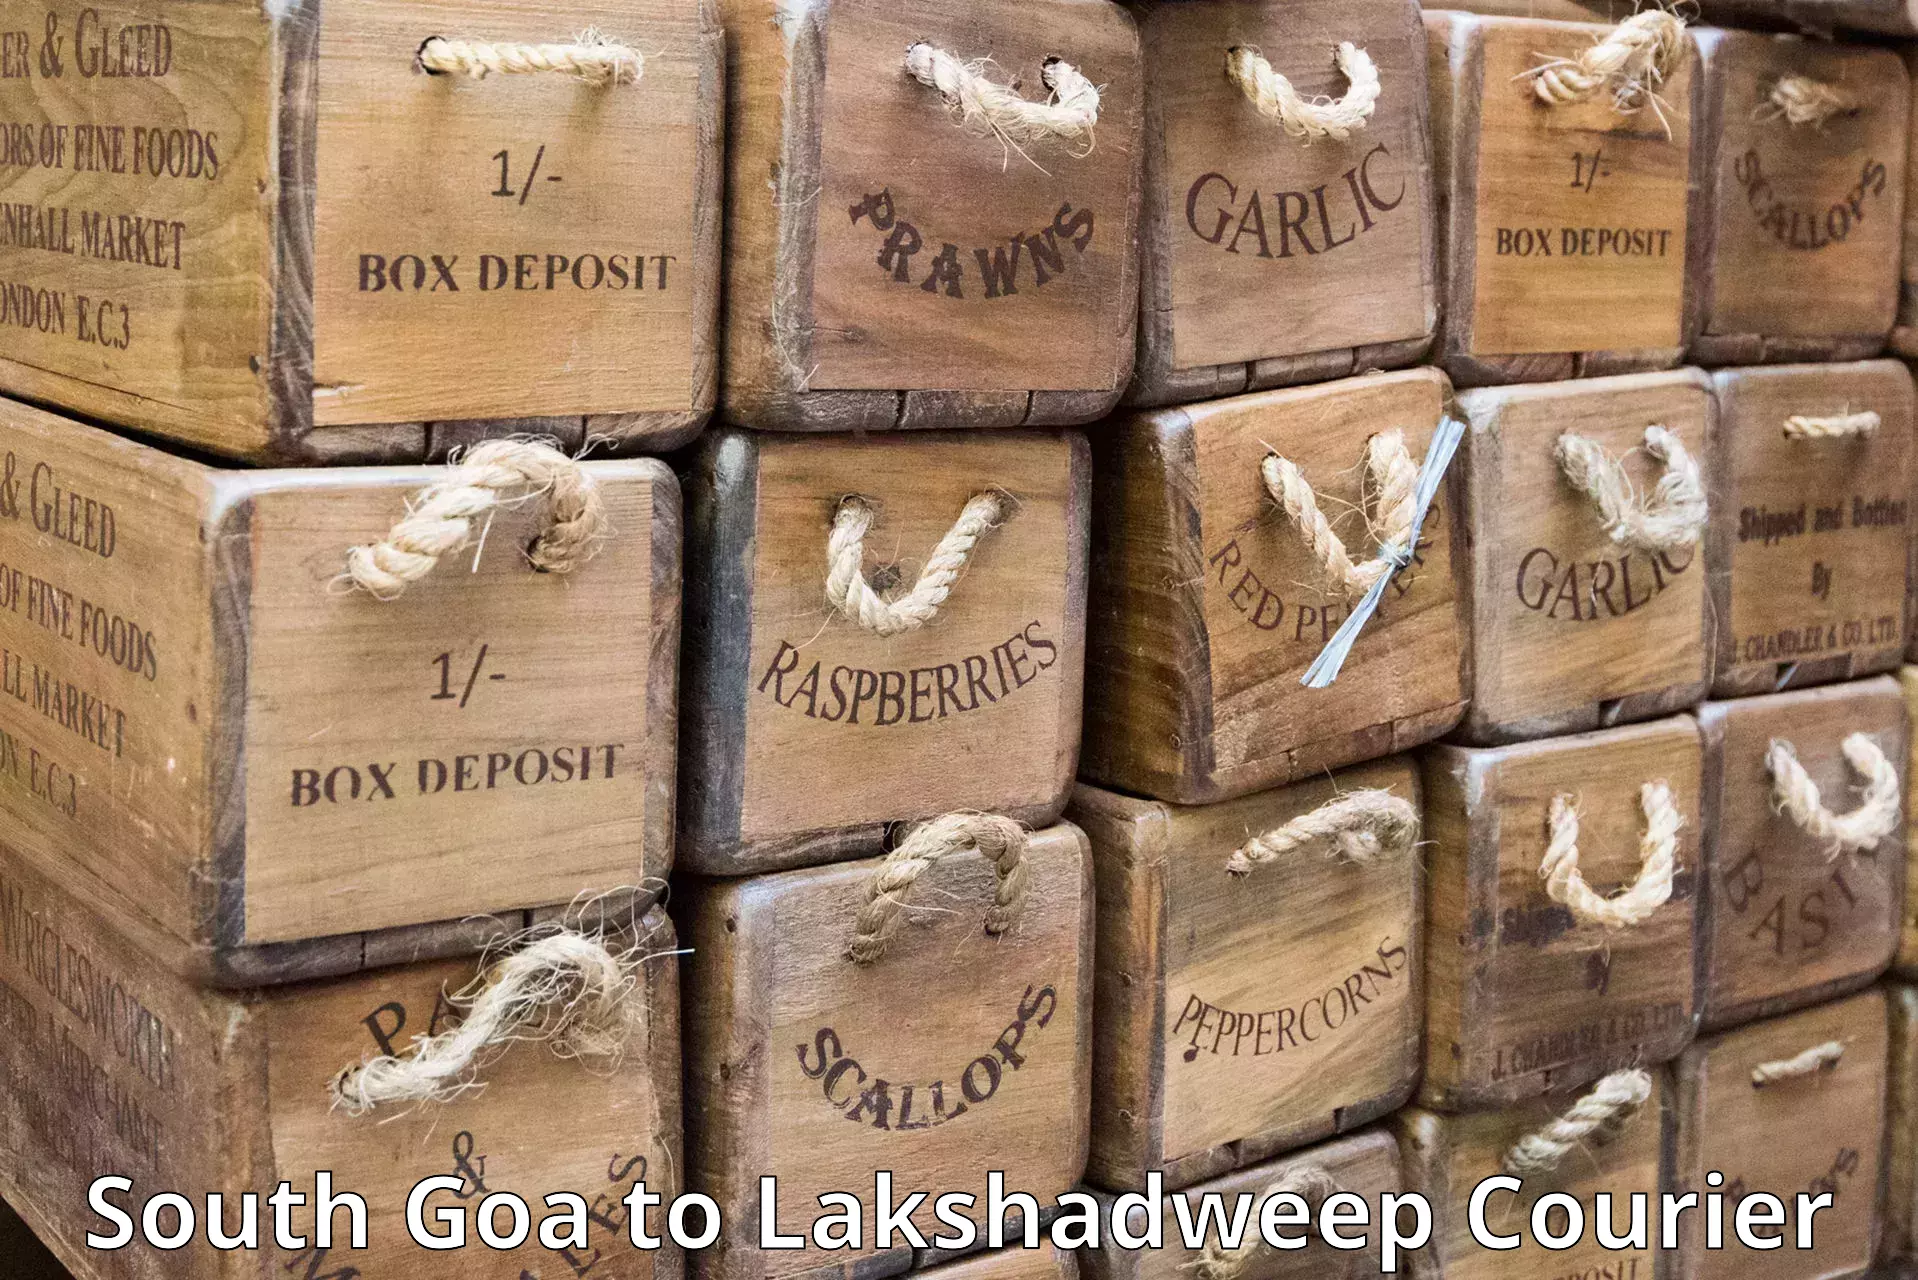 Quick dispatch service South Goa to Lakshadweep